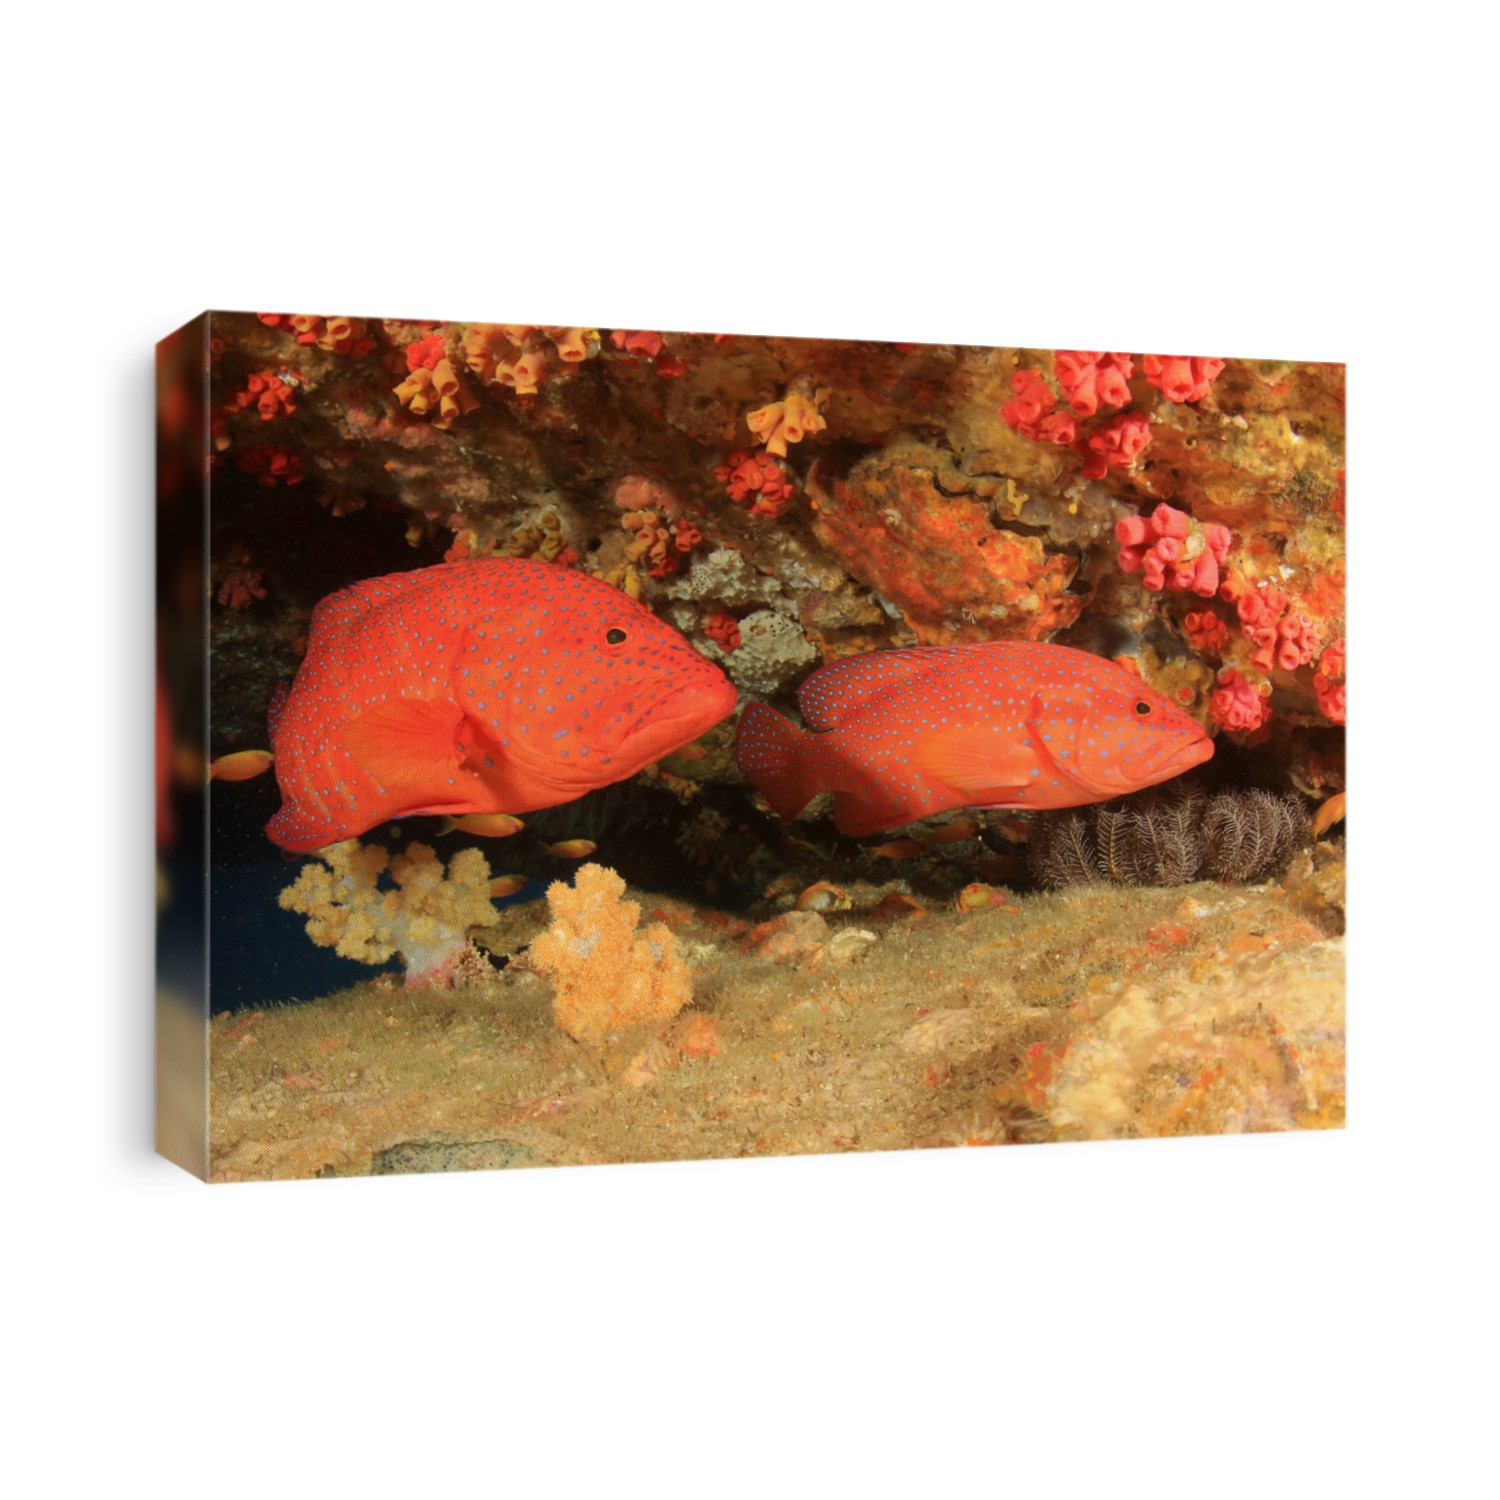 Red Coral Grouper fish